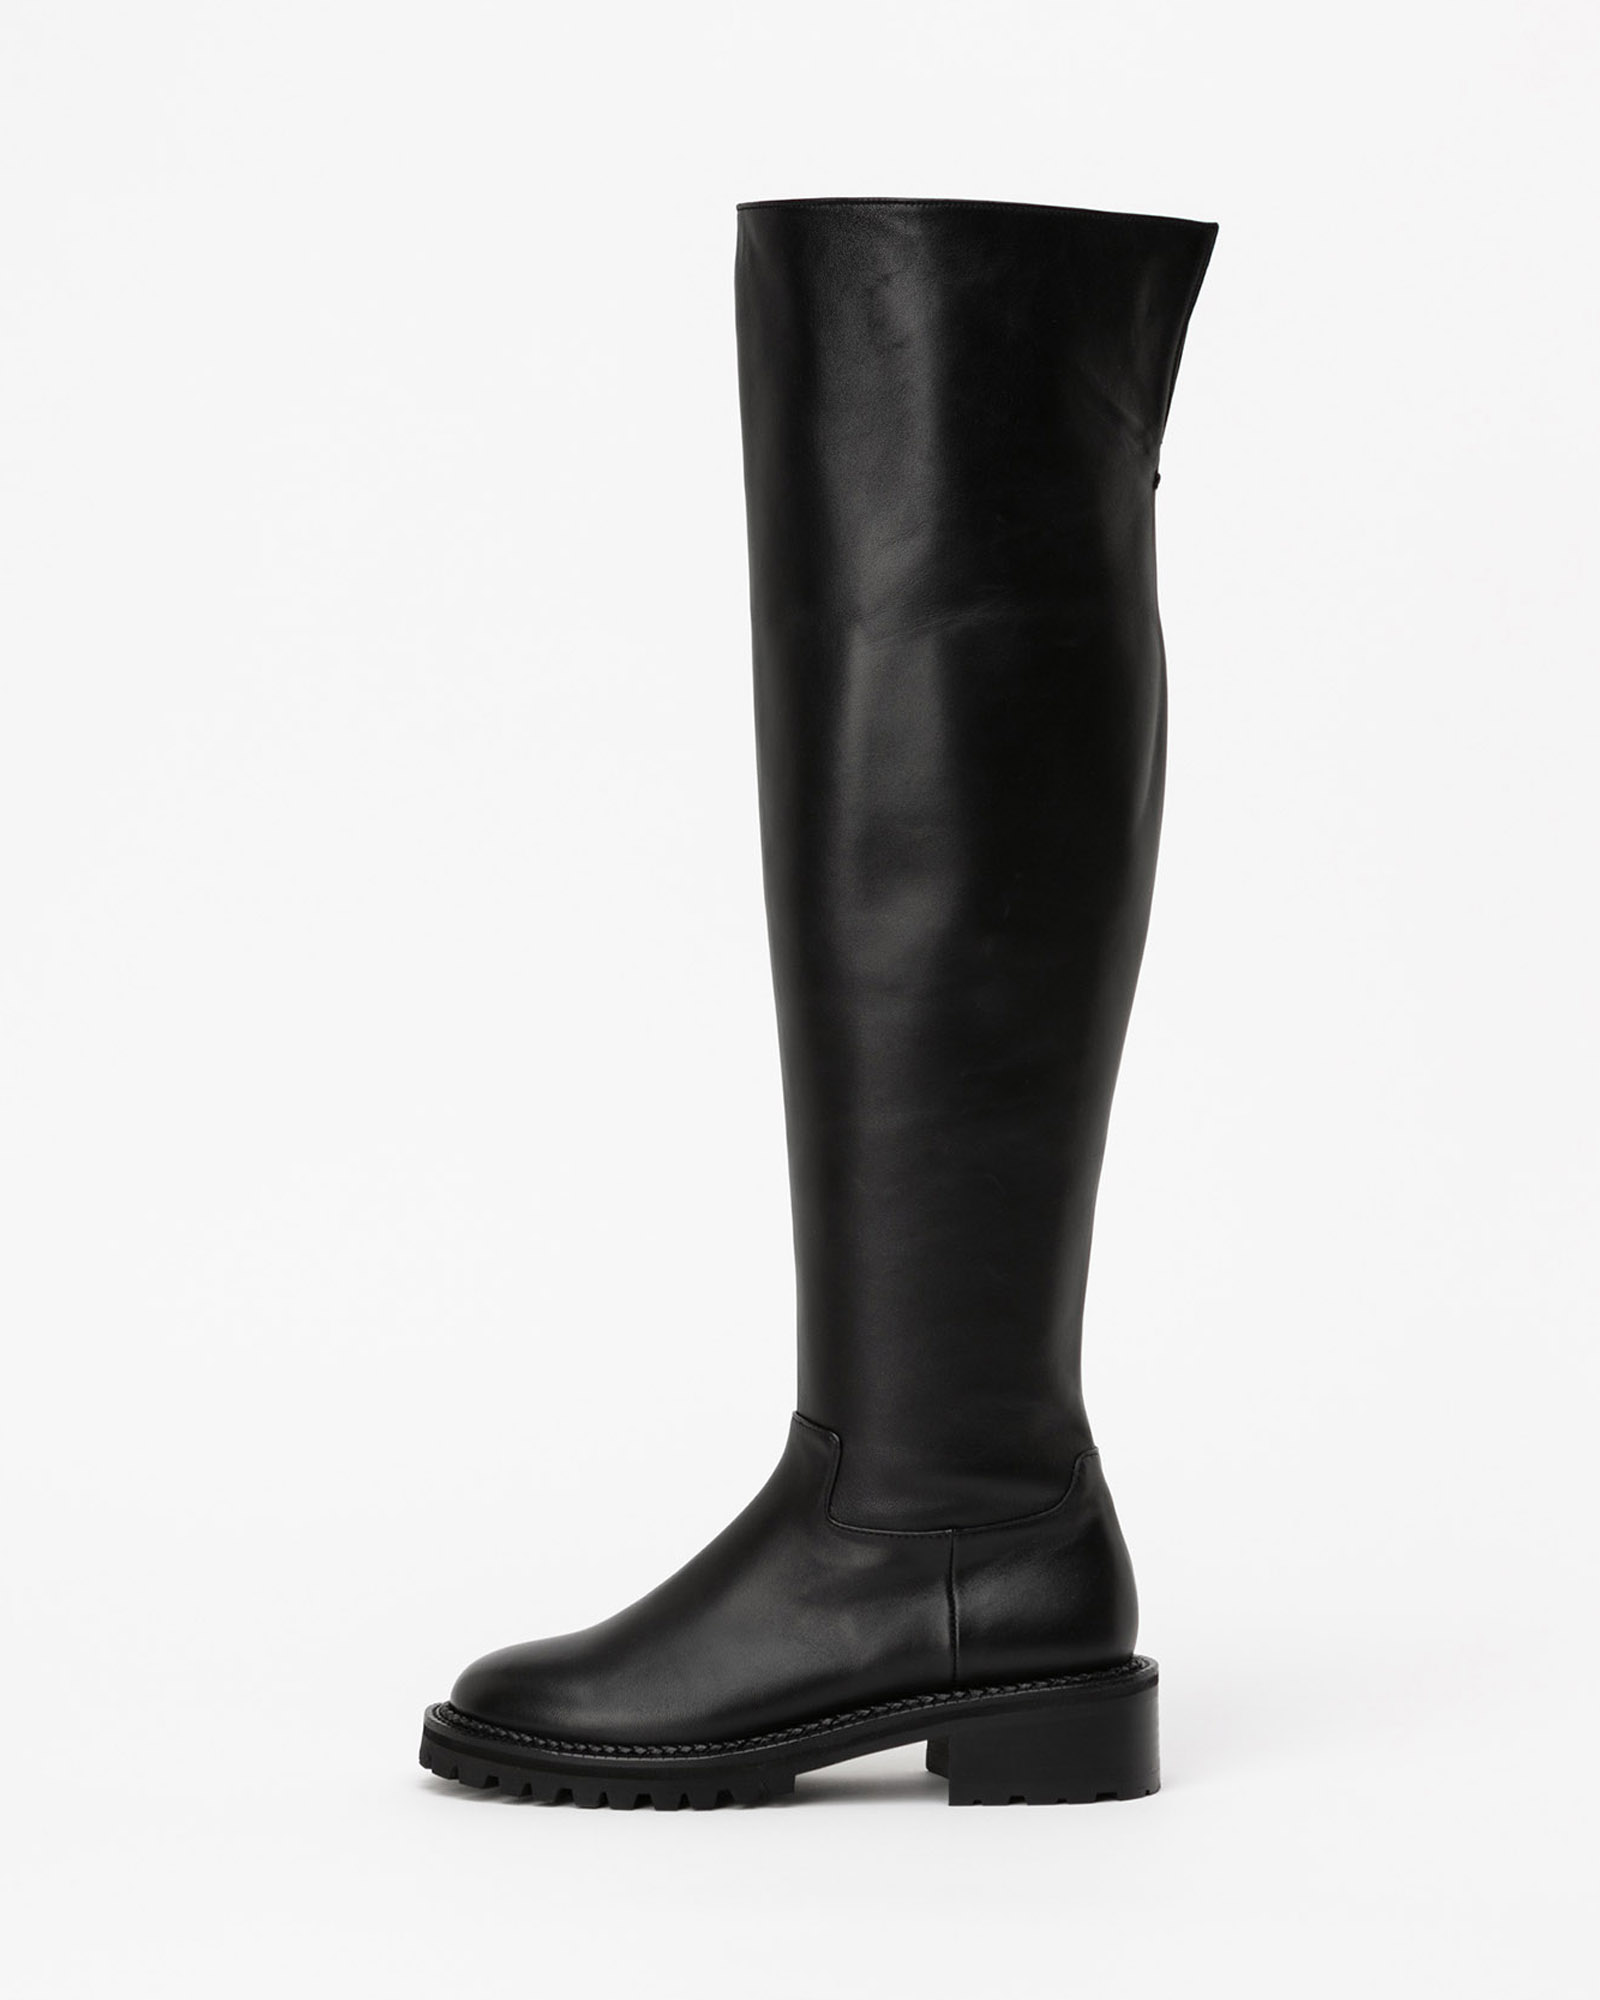 Barcarole Thigh-high Boots in Black